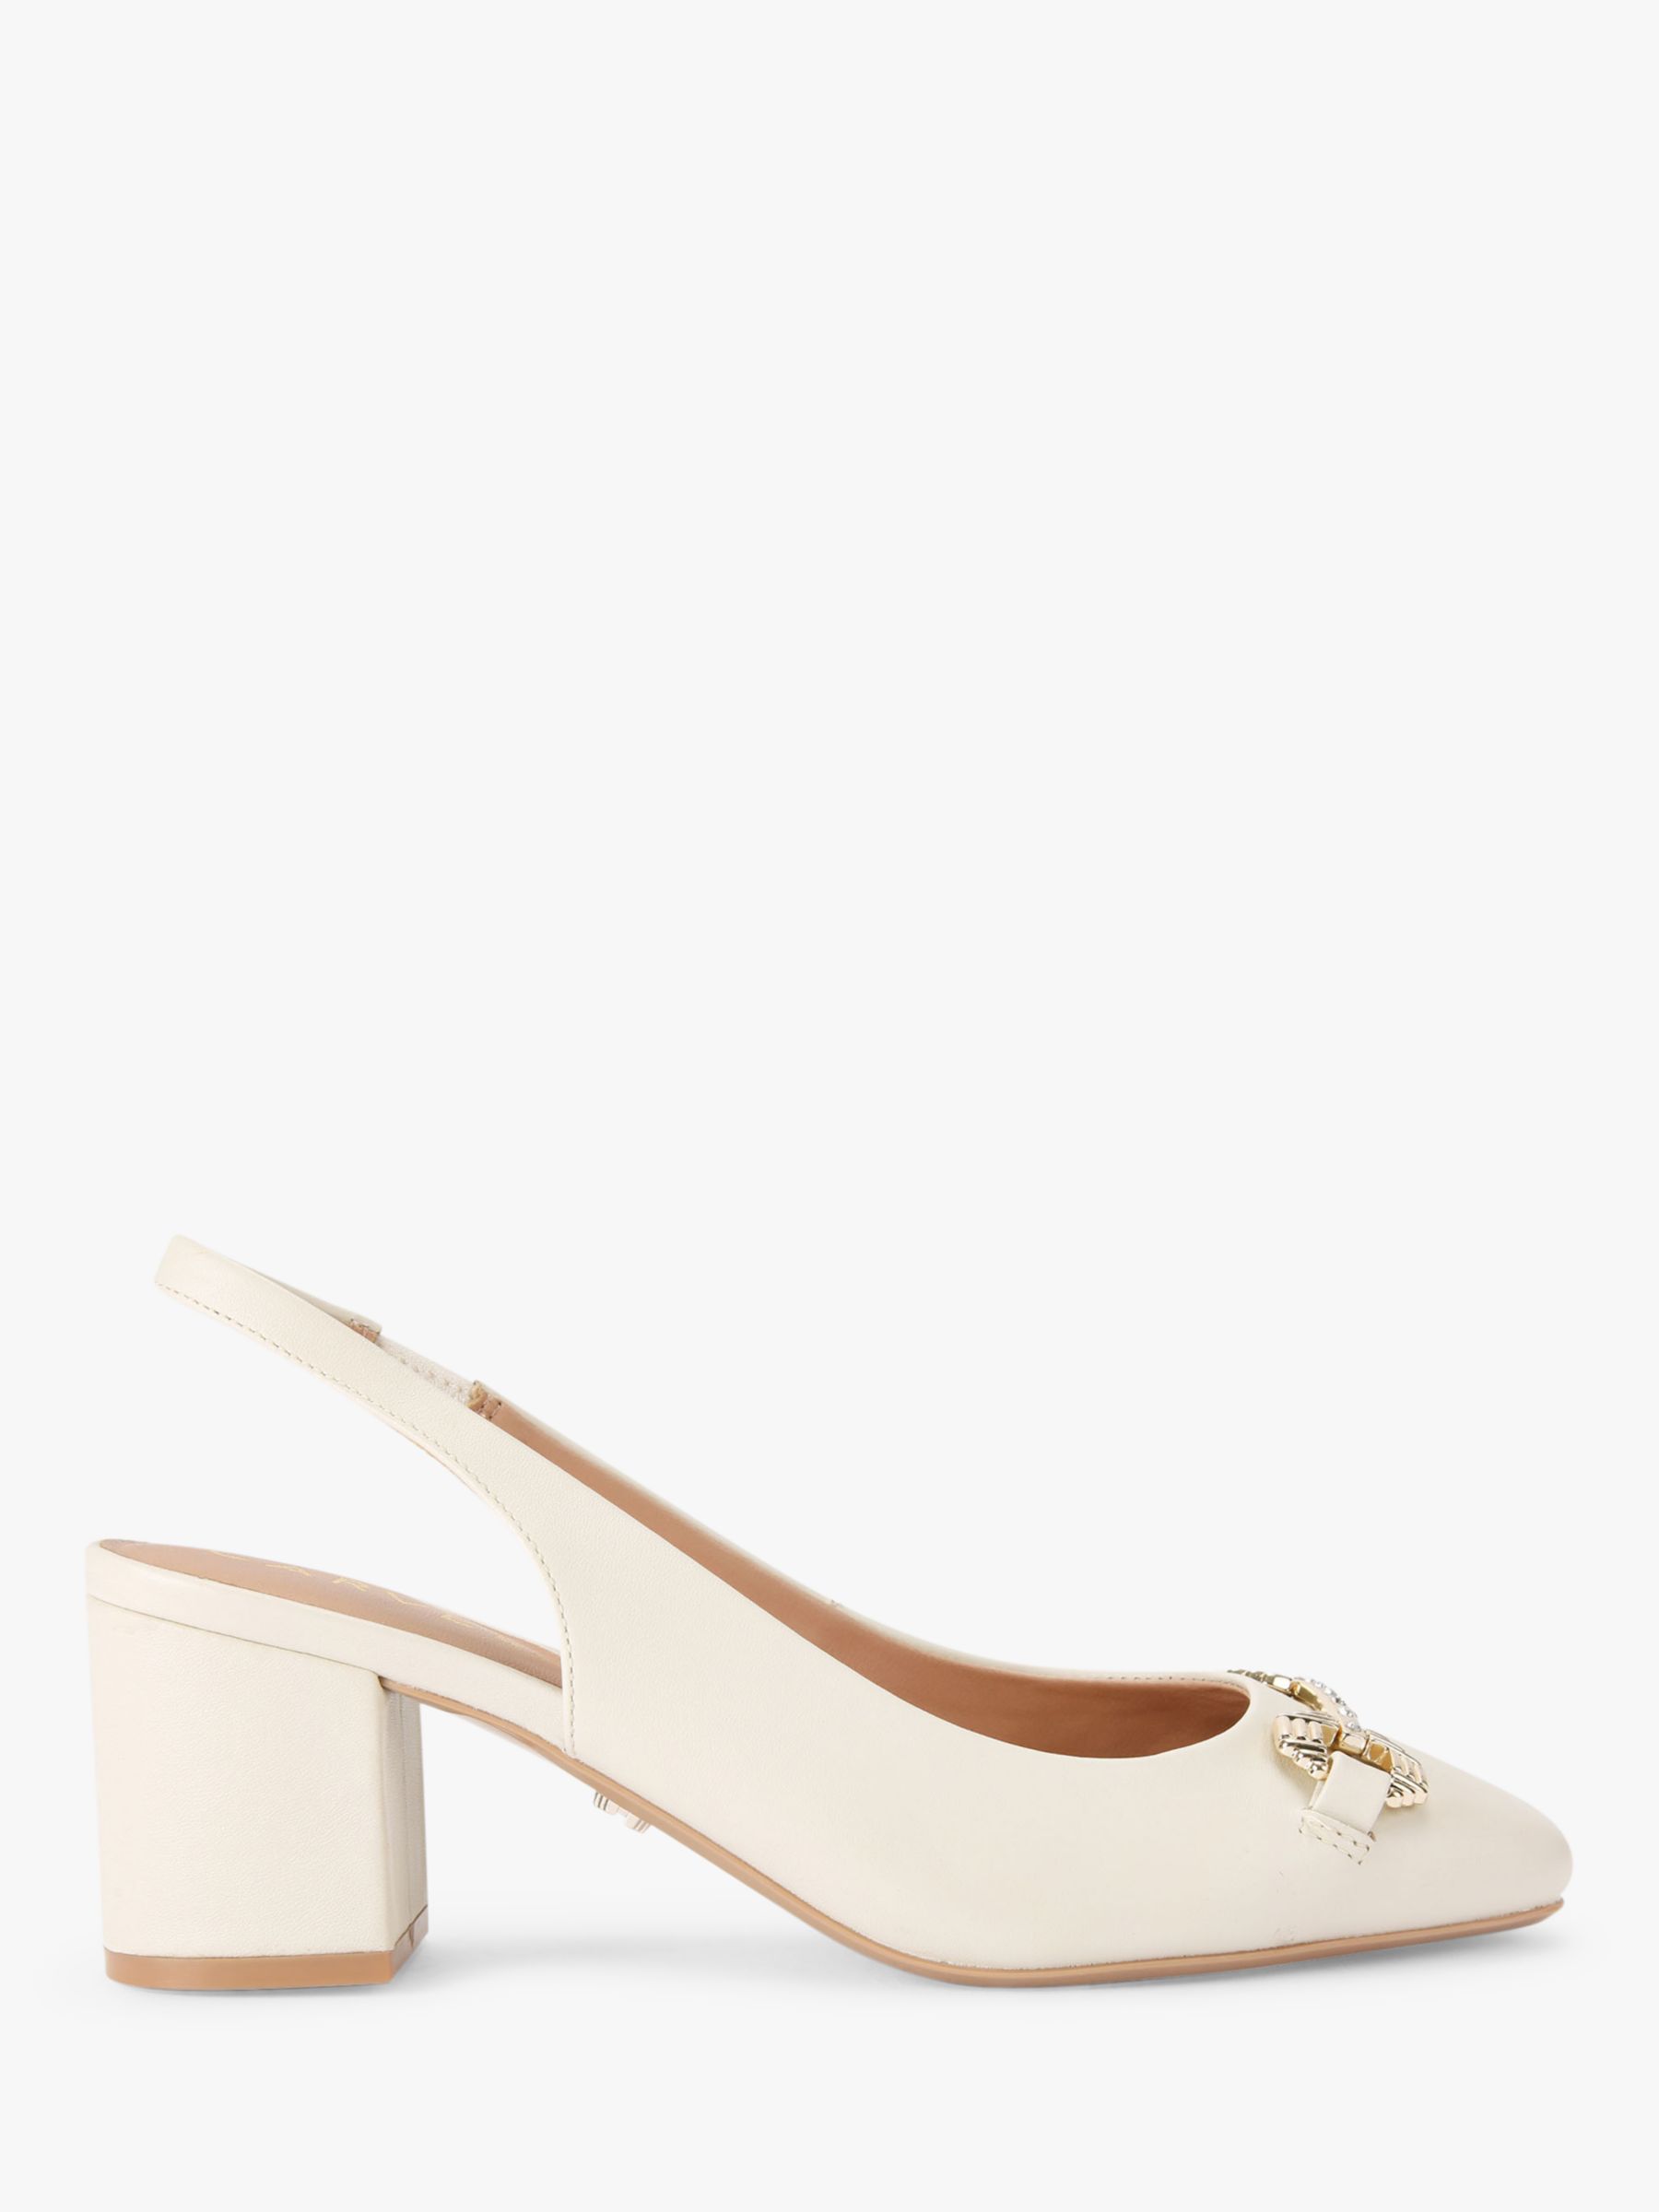 Carvela Poise 2 Patent Slingback Court Shoes, Natural Putty at John ...